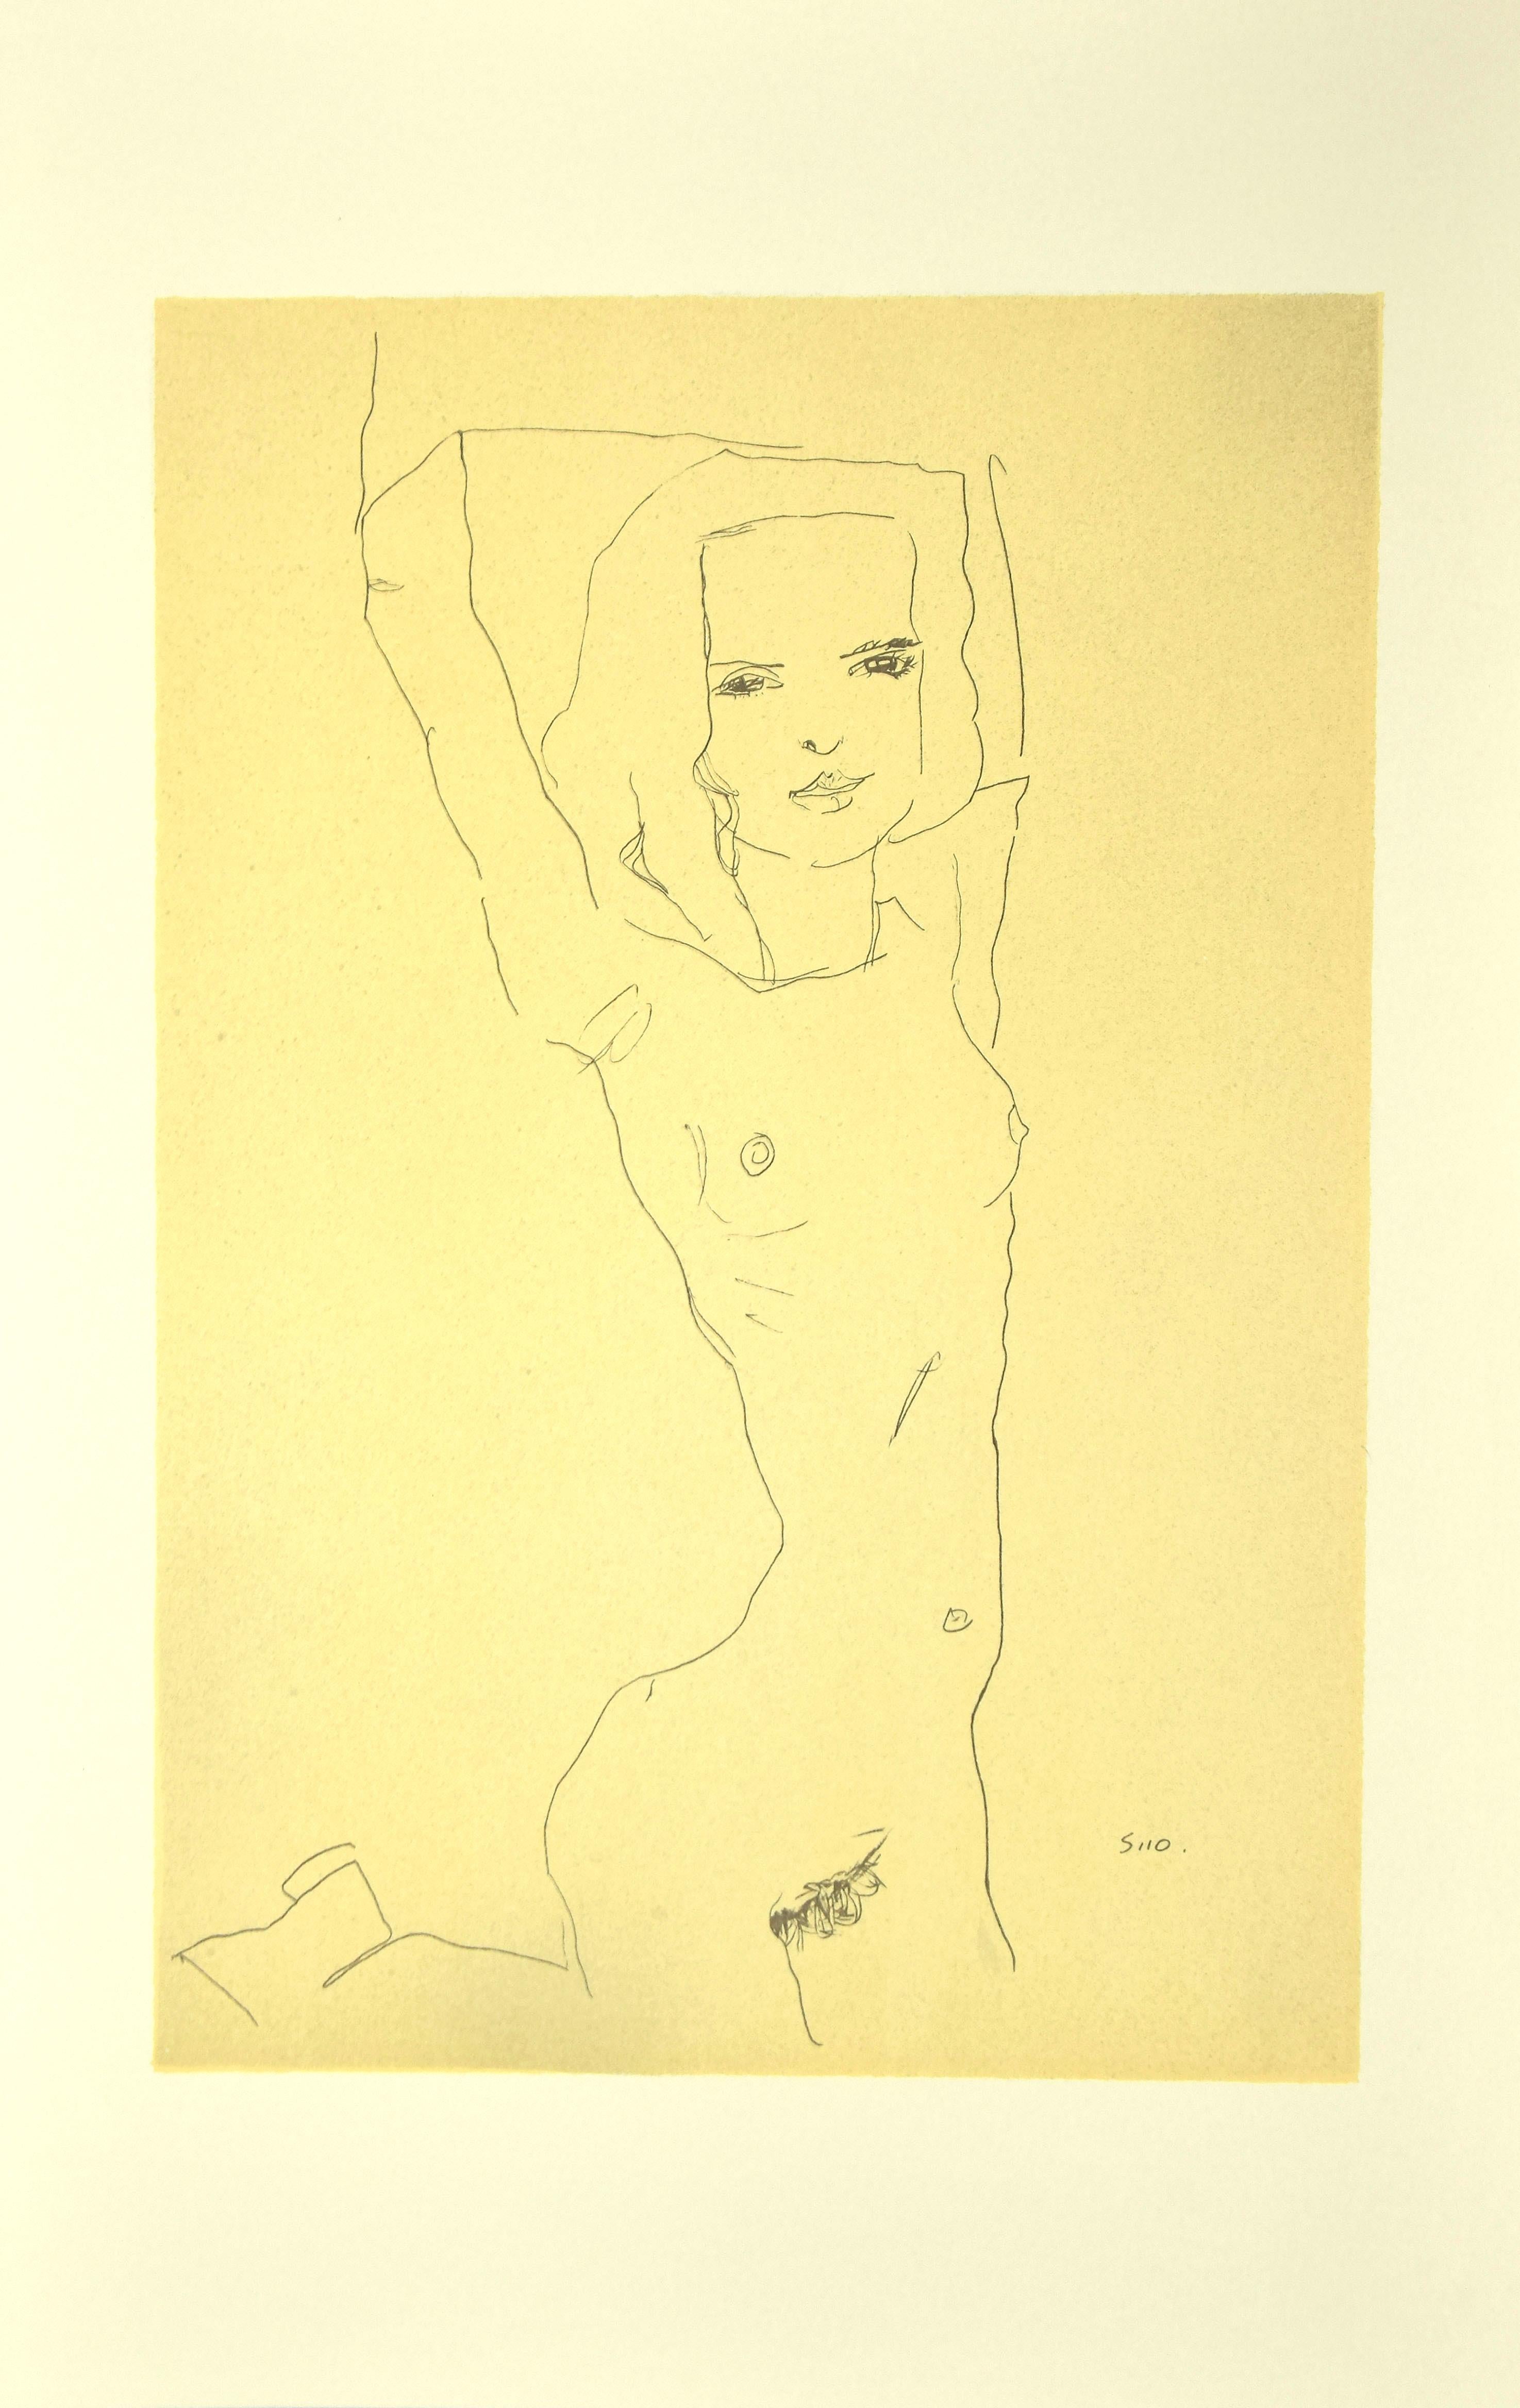 (after) Egon Schiele Nude Print - Nude Girl with Raised Arms - Original Lithograph after E. Schiele